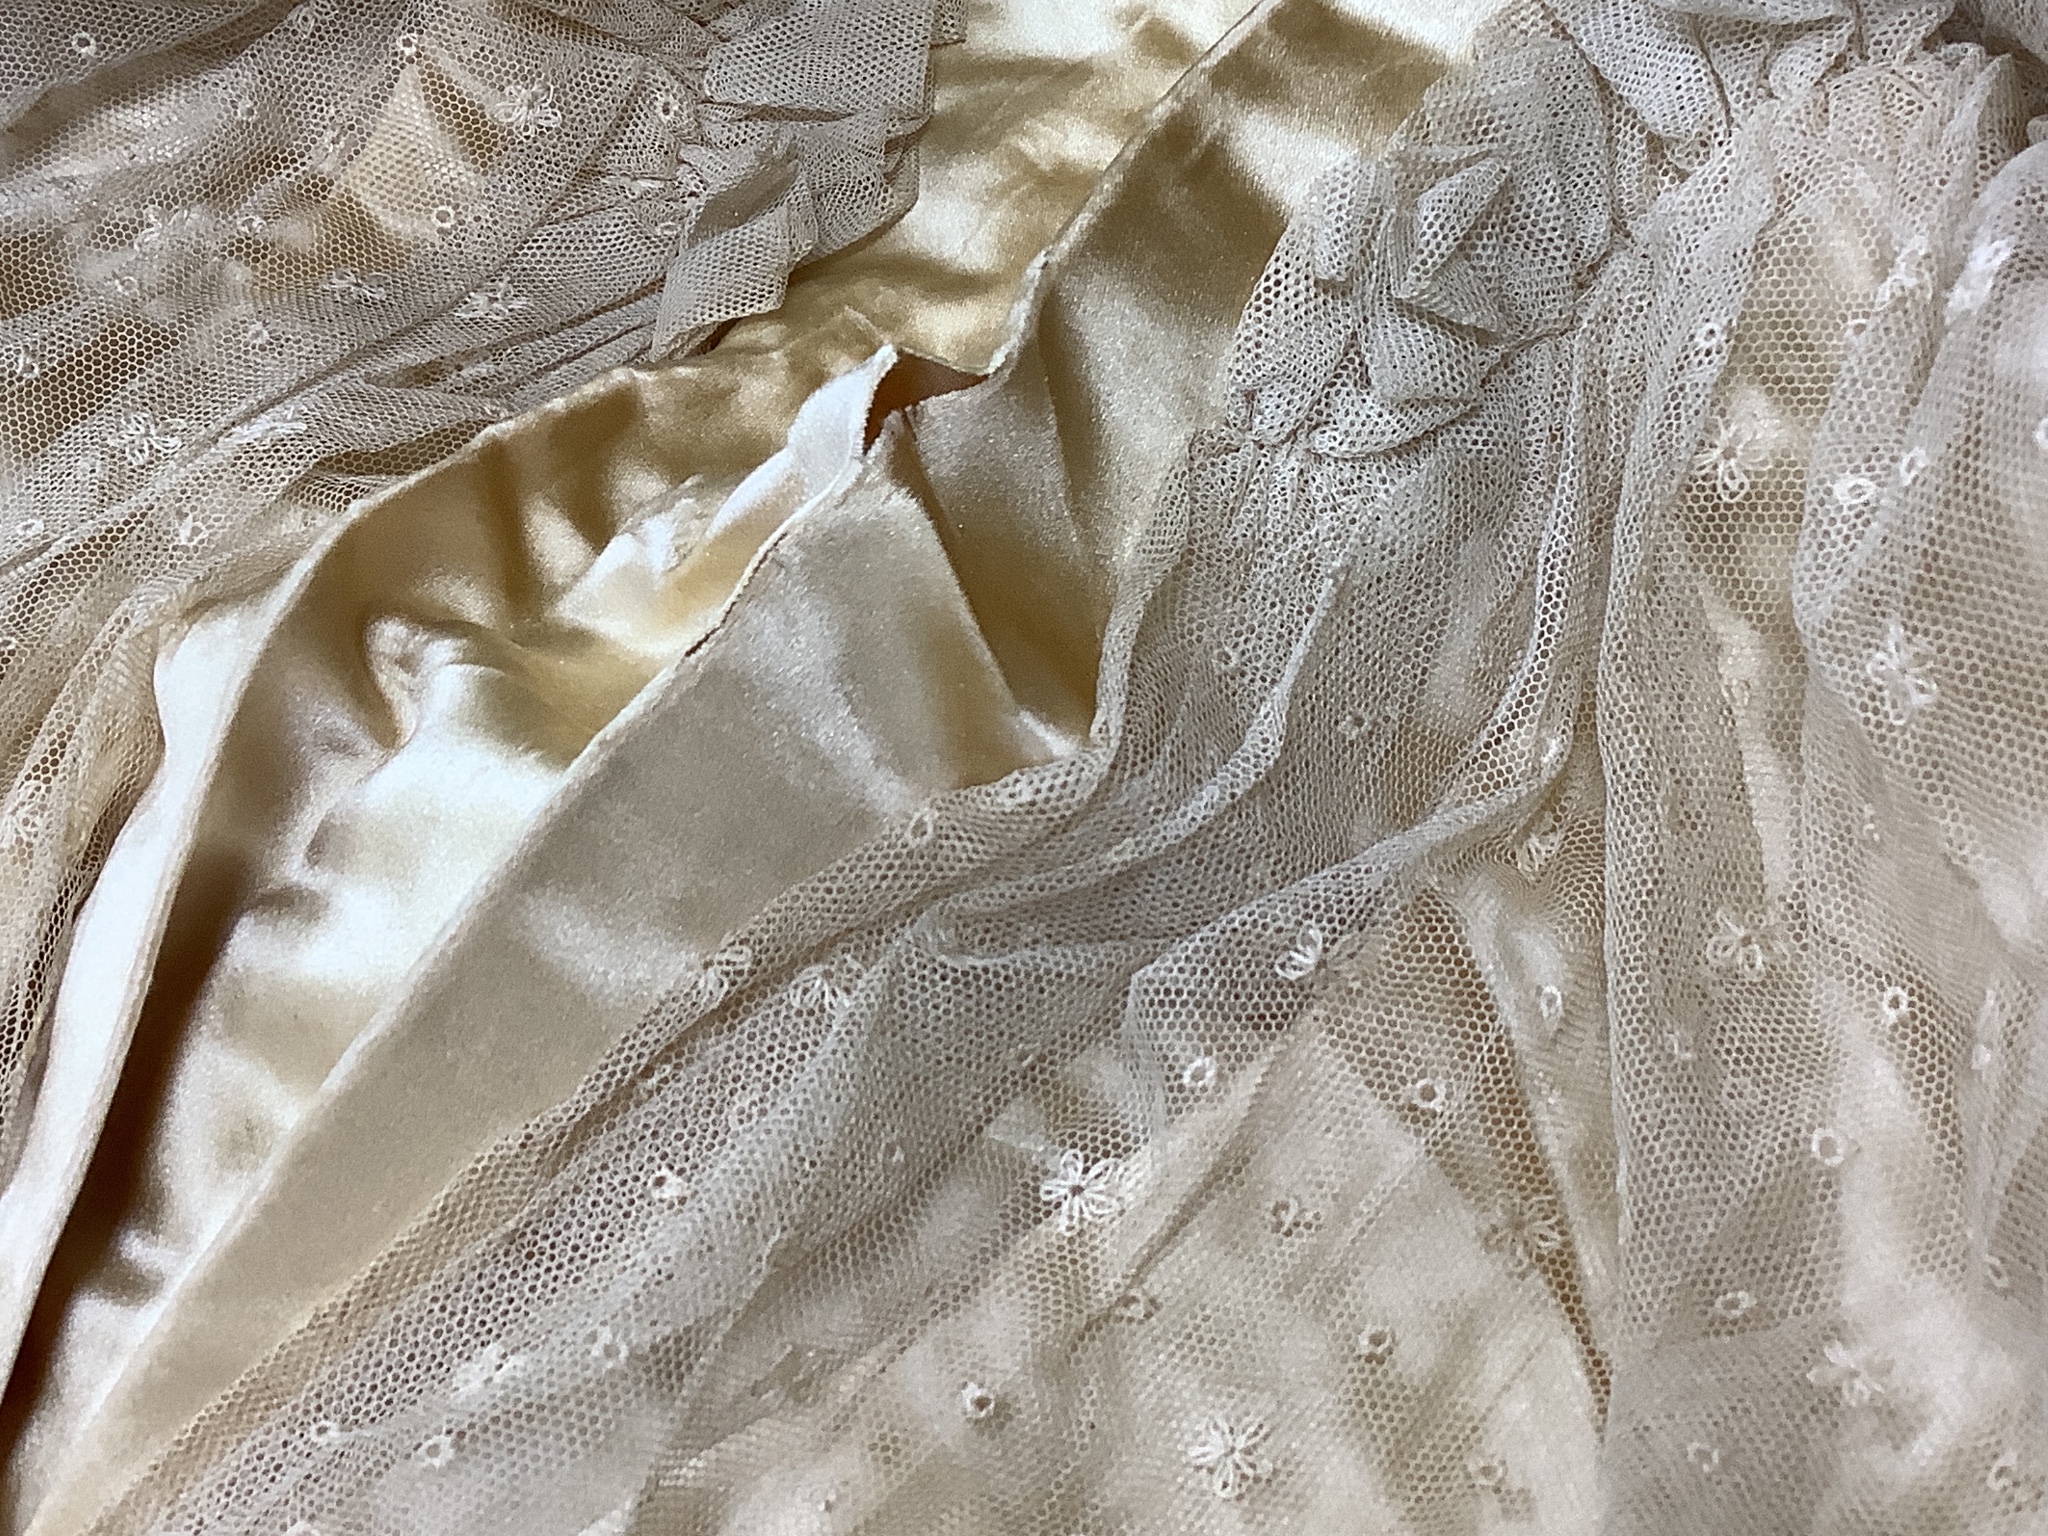 A Firth and Russell cream satin and lace wedding dress